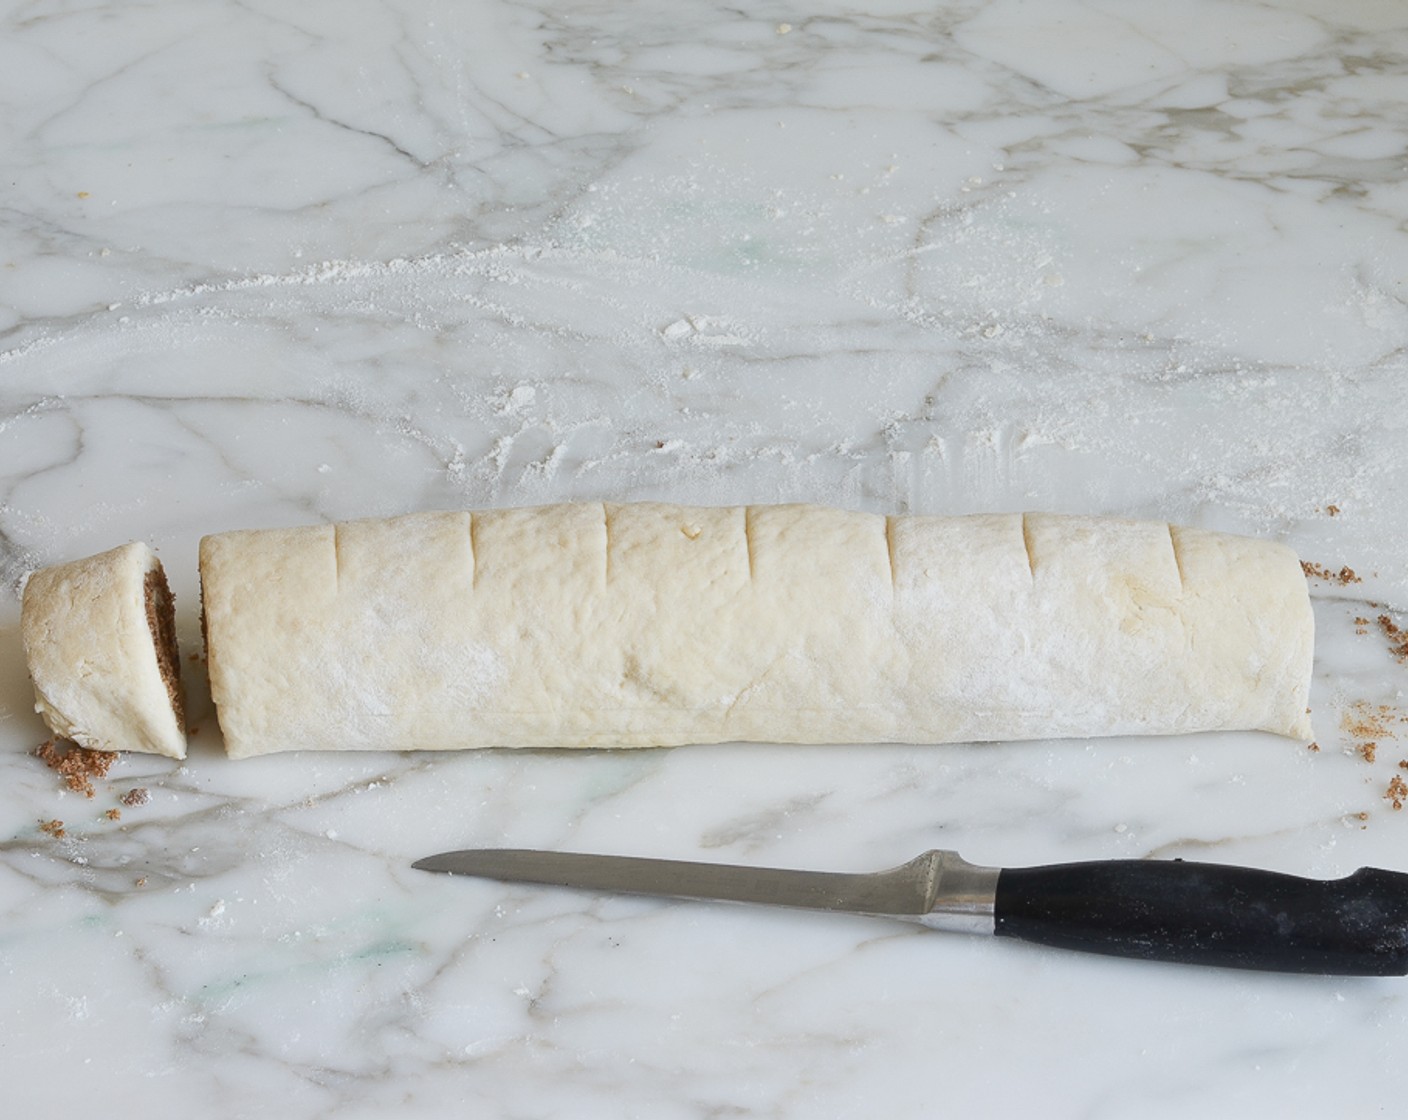 step 9 Starting at the long side, roll the dough, pressing lightly, to form a tight log. Pinch the seam to seal.